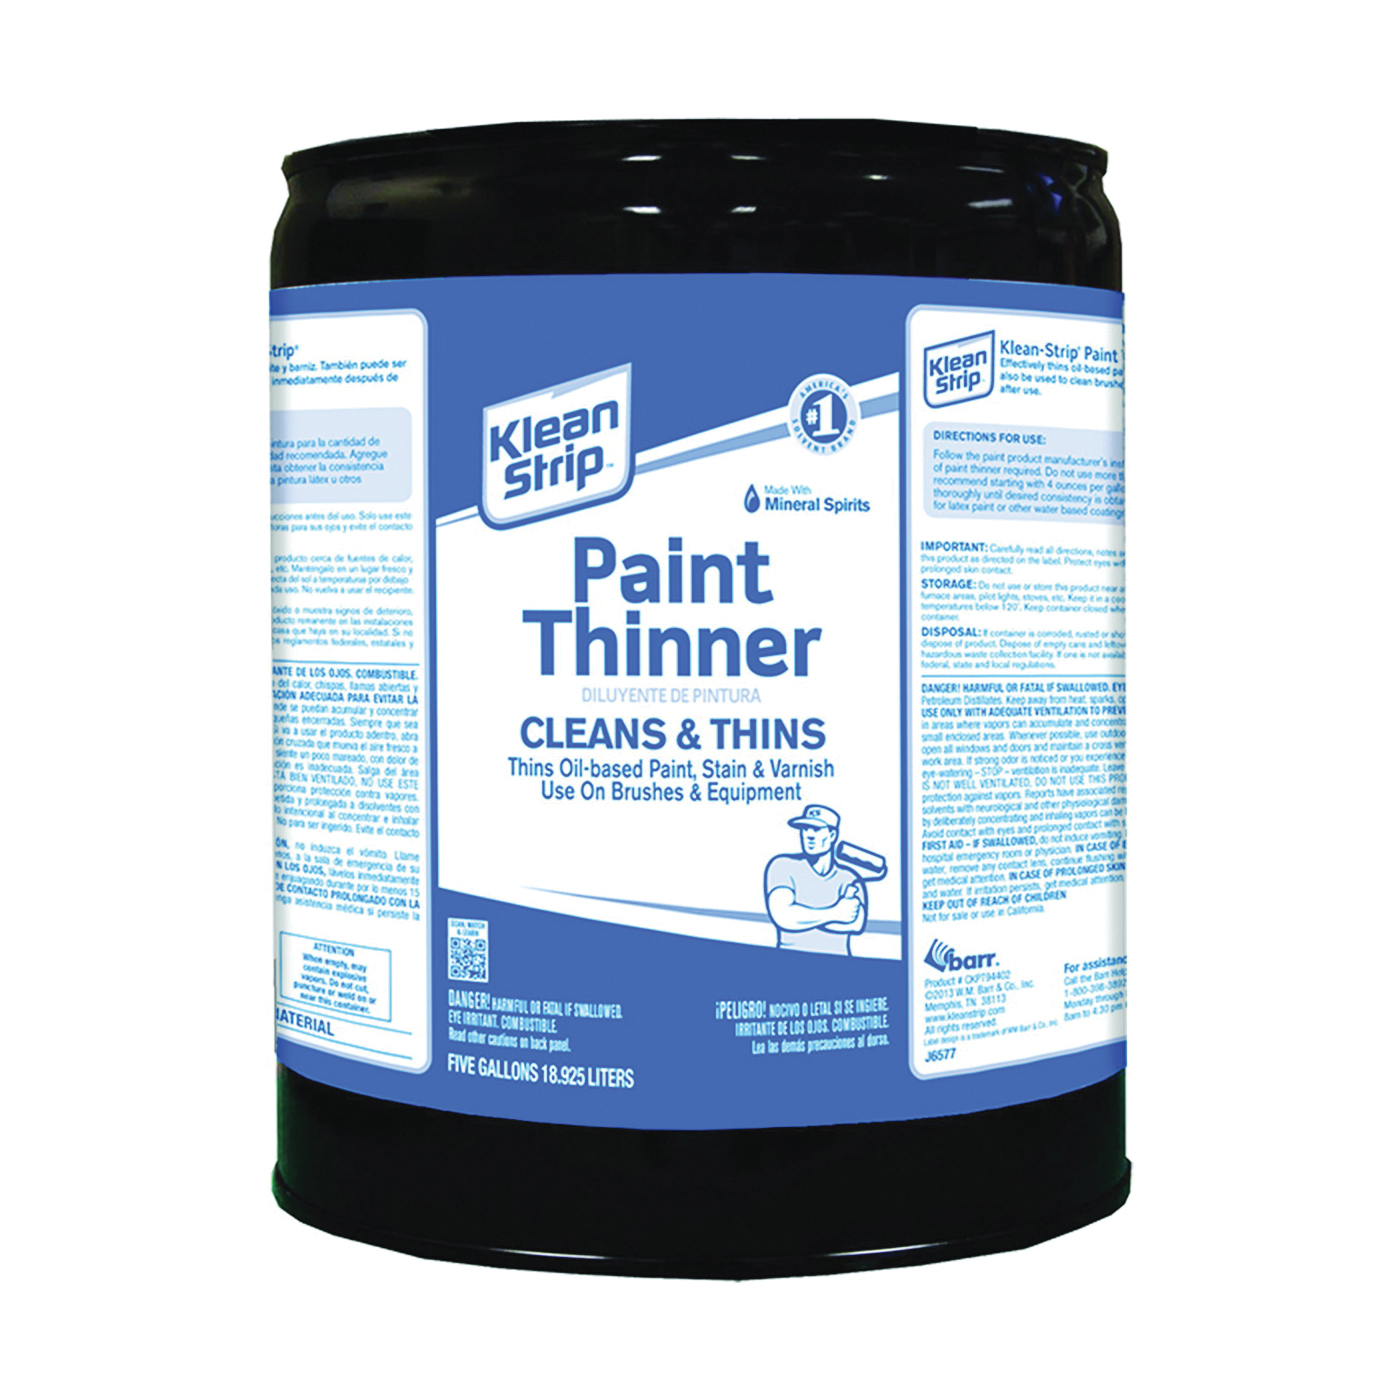 CKPT94402 Paint Thinner, Liquid, Free, Clear, Water White, 5 gal, Can